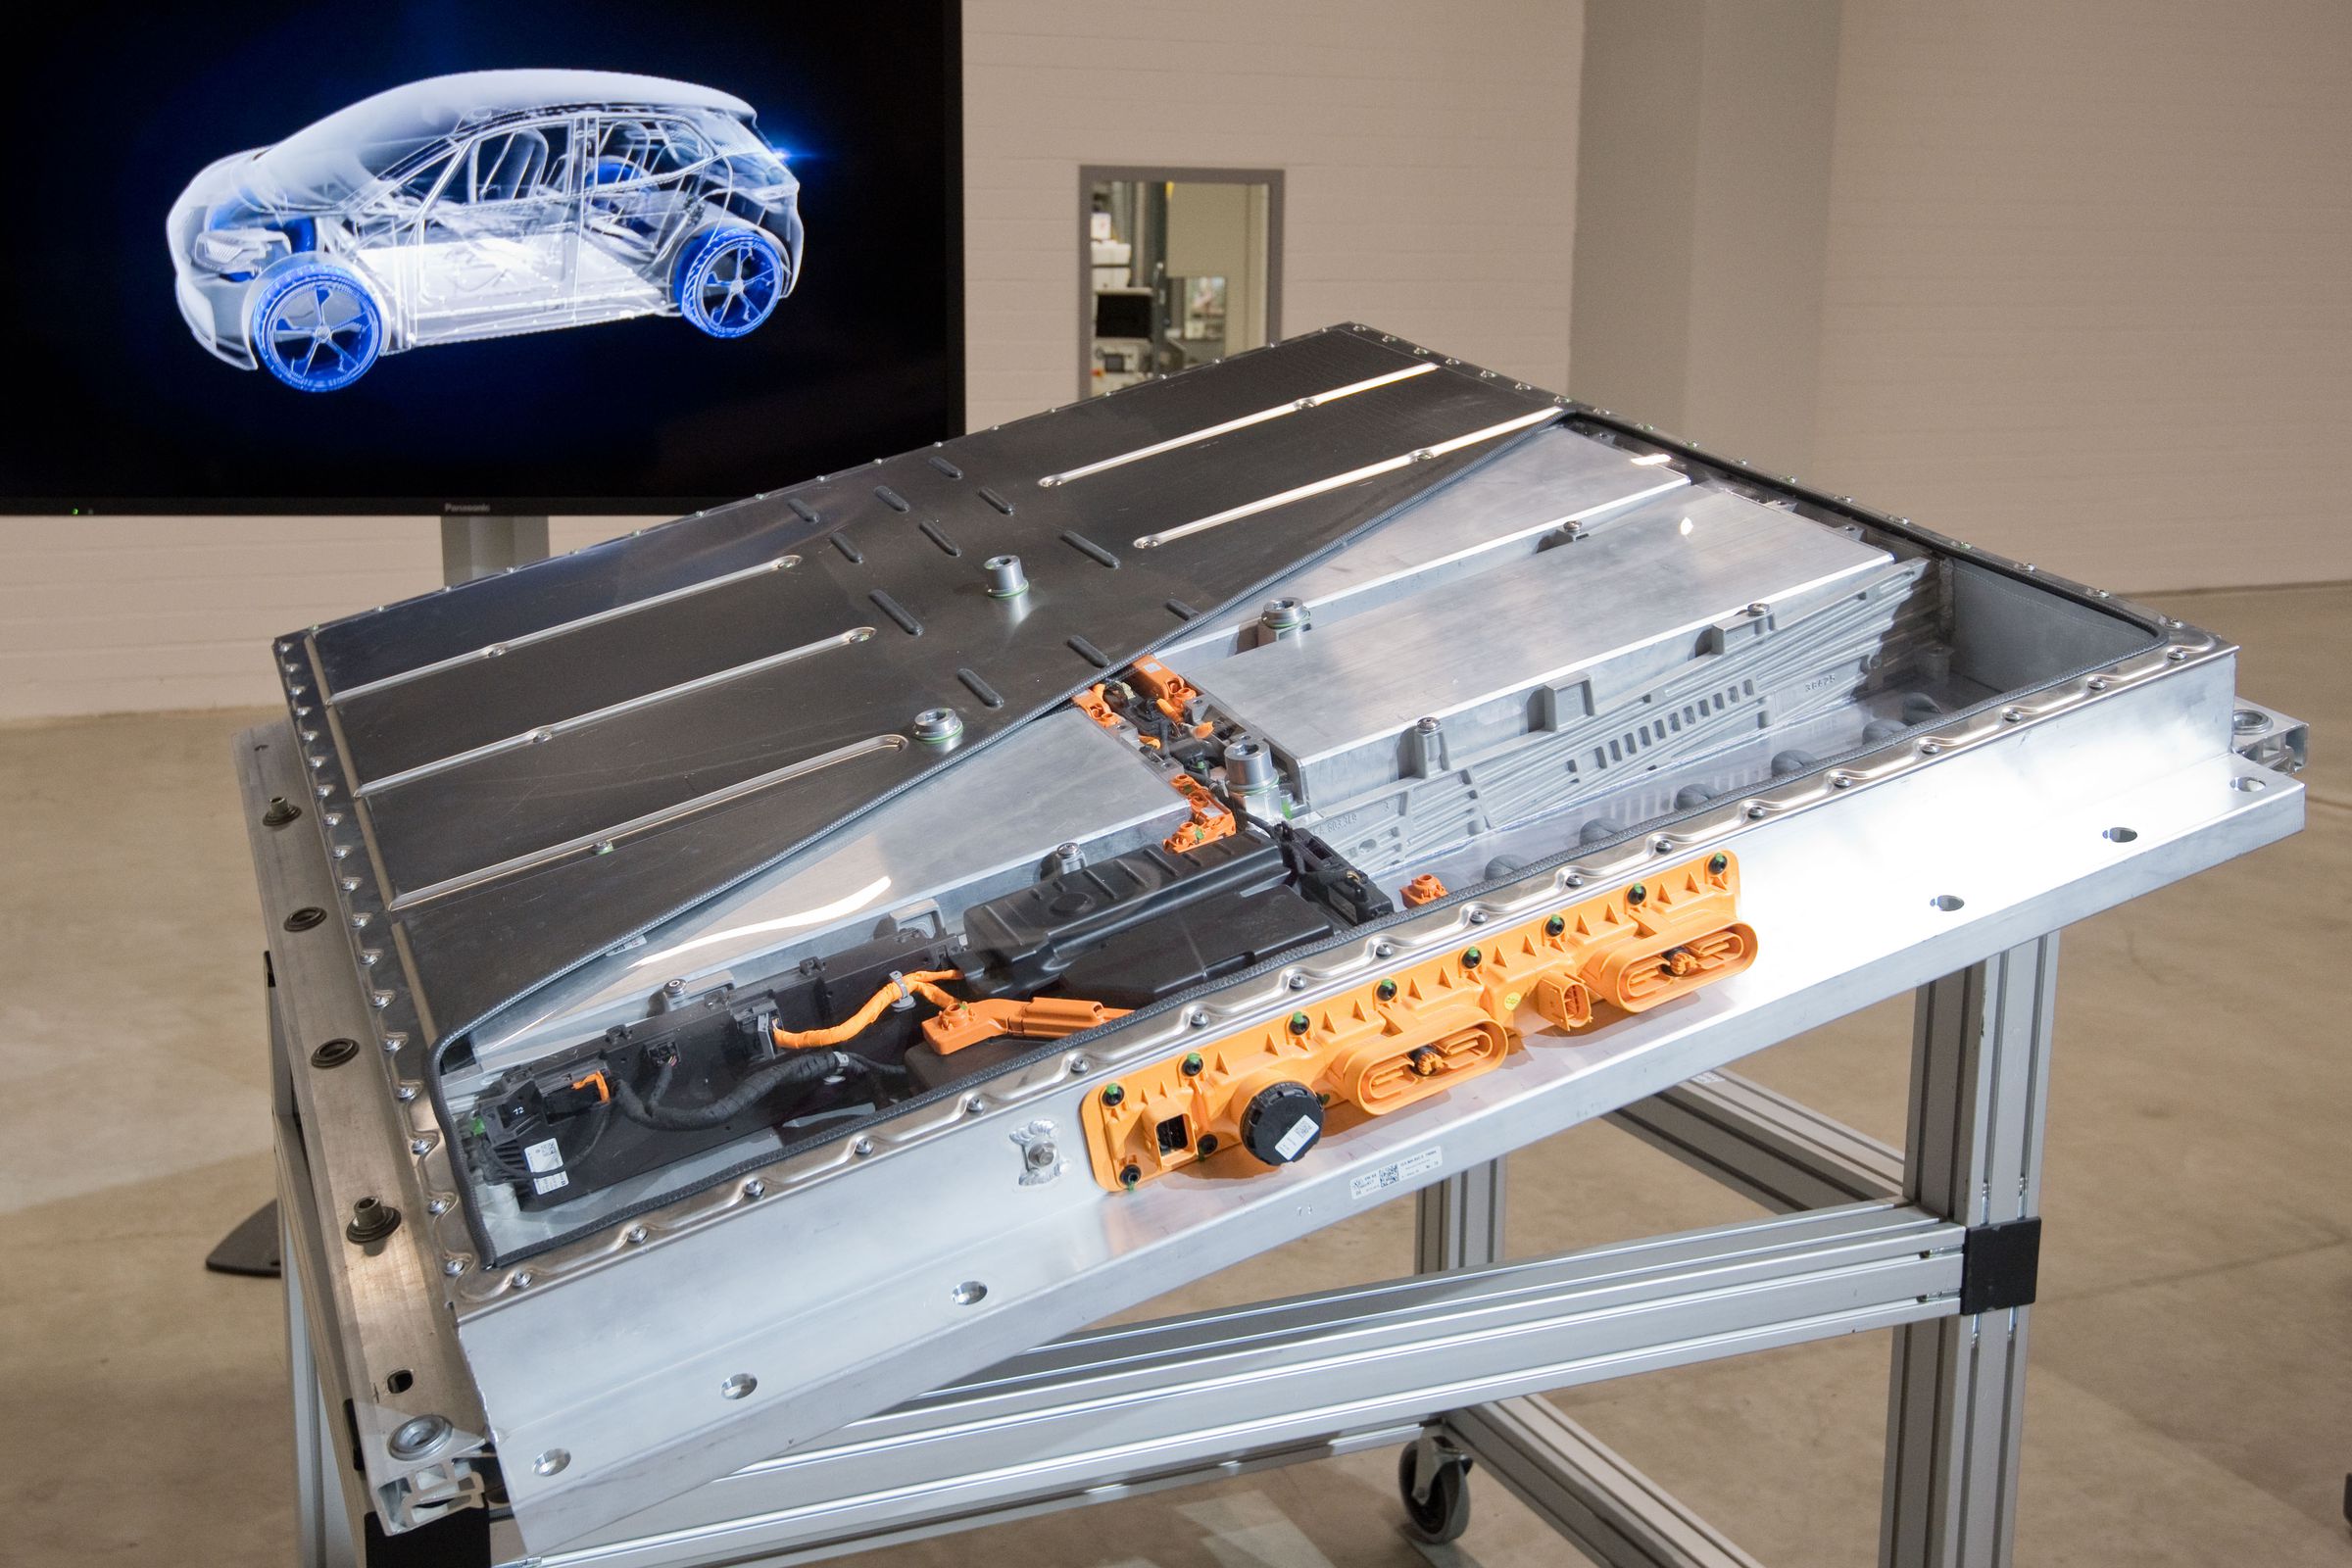 Volkswagen - Production of battery cells for electric cars